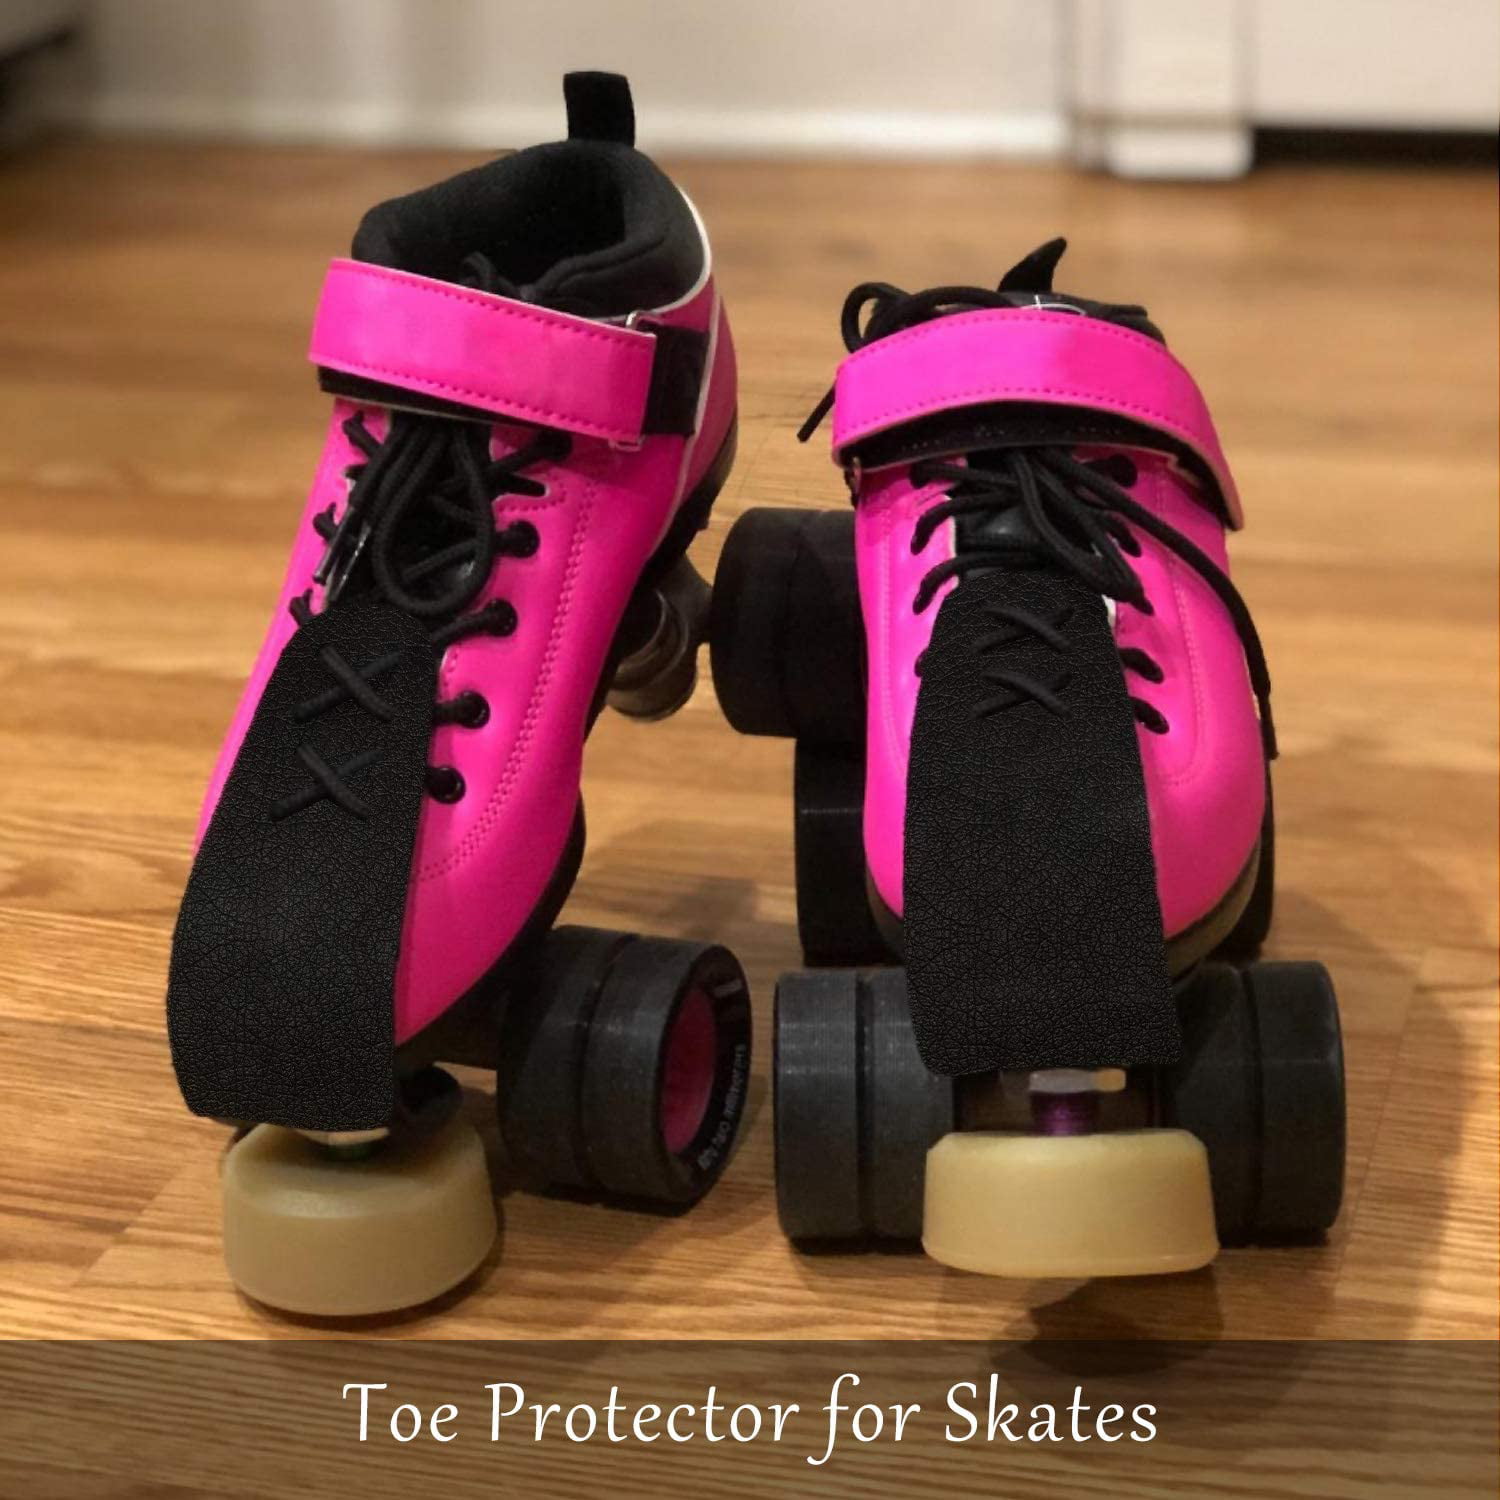 BESPORTBLE Roller Skates Leather Toe Guards Flat Toe Guard Protectors Roller Skate Toe Caps Covers Skating Accessories Supply Black 